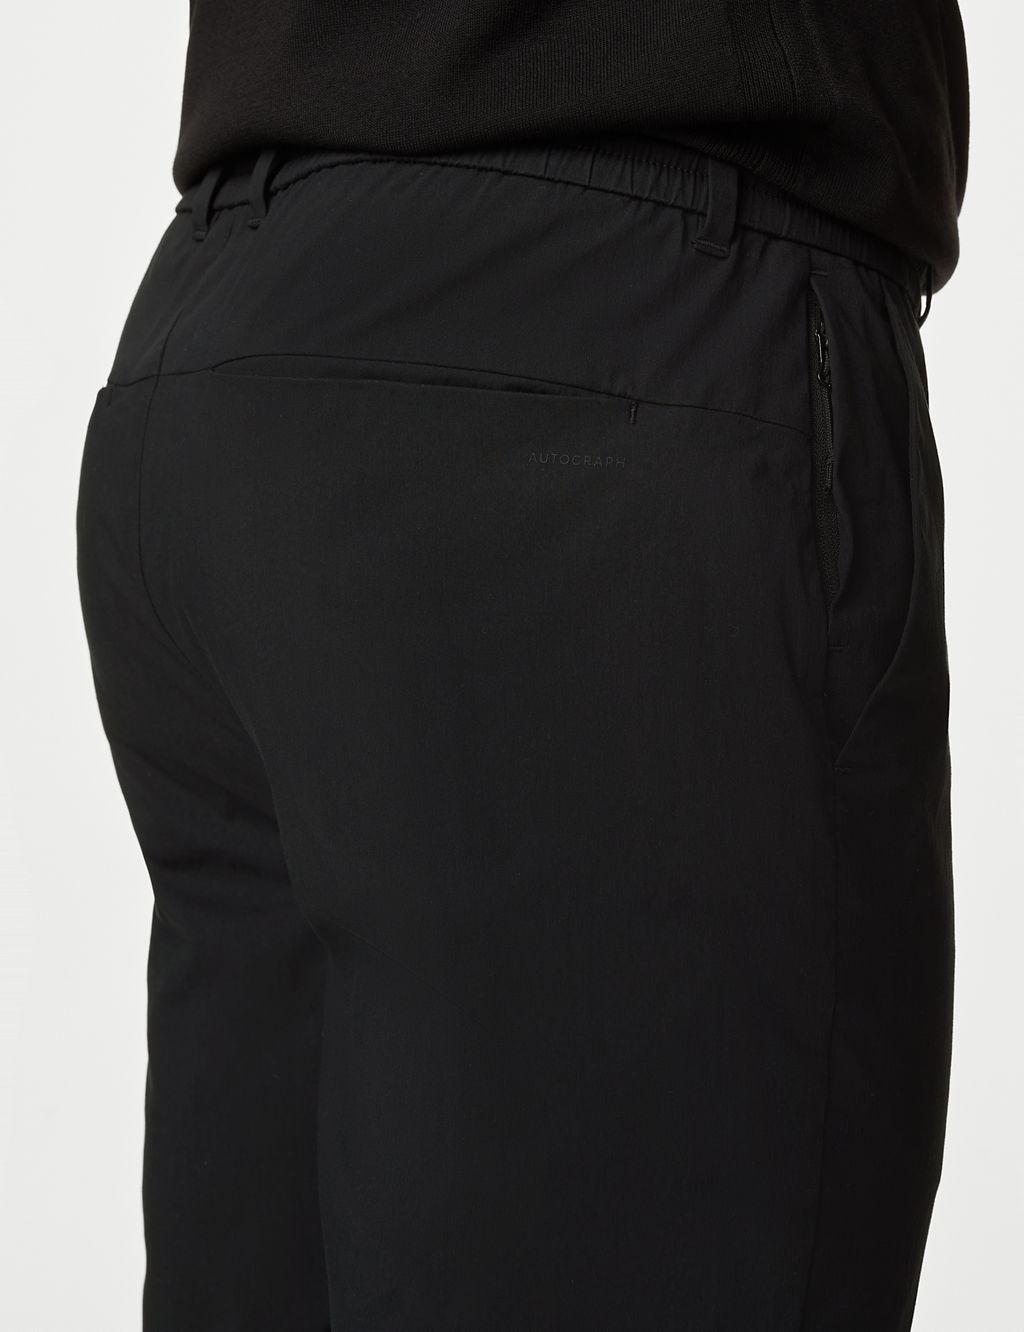 Straight Fit Stretch Performance Trouser 4 of 7